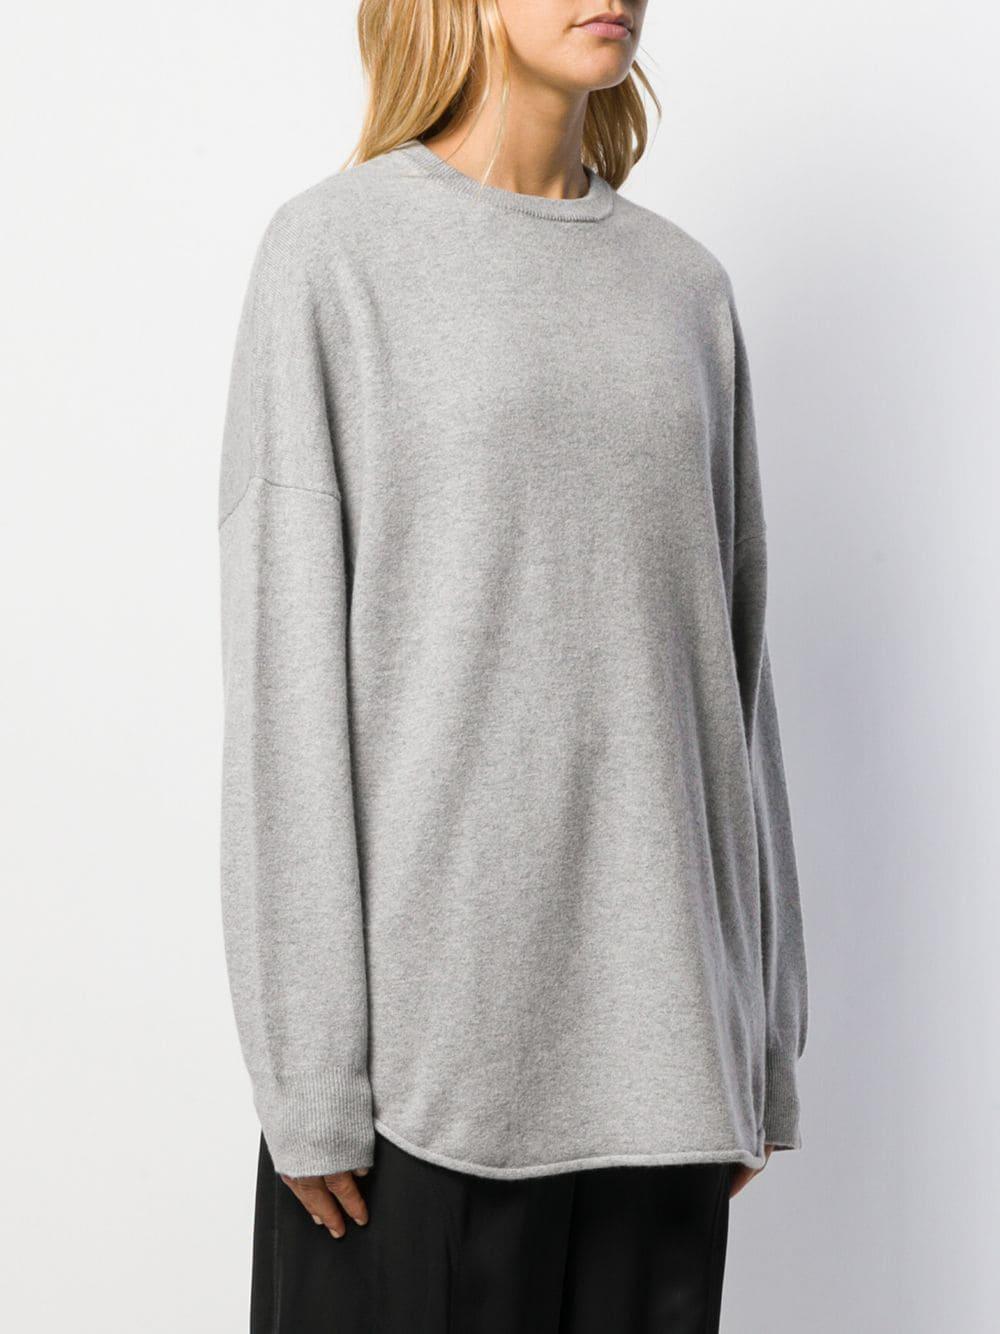 Extreme Cashmere Cashmere Blend Sweater in Grey (Gray) - Lyst